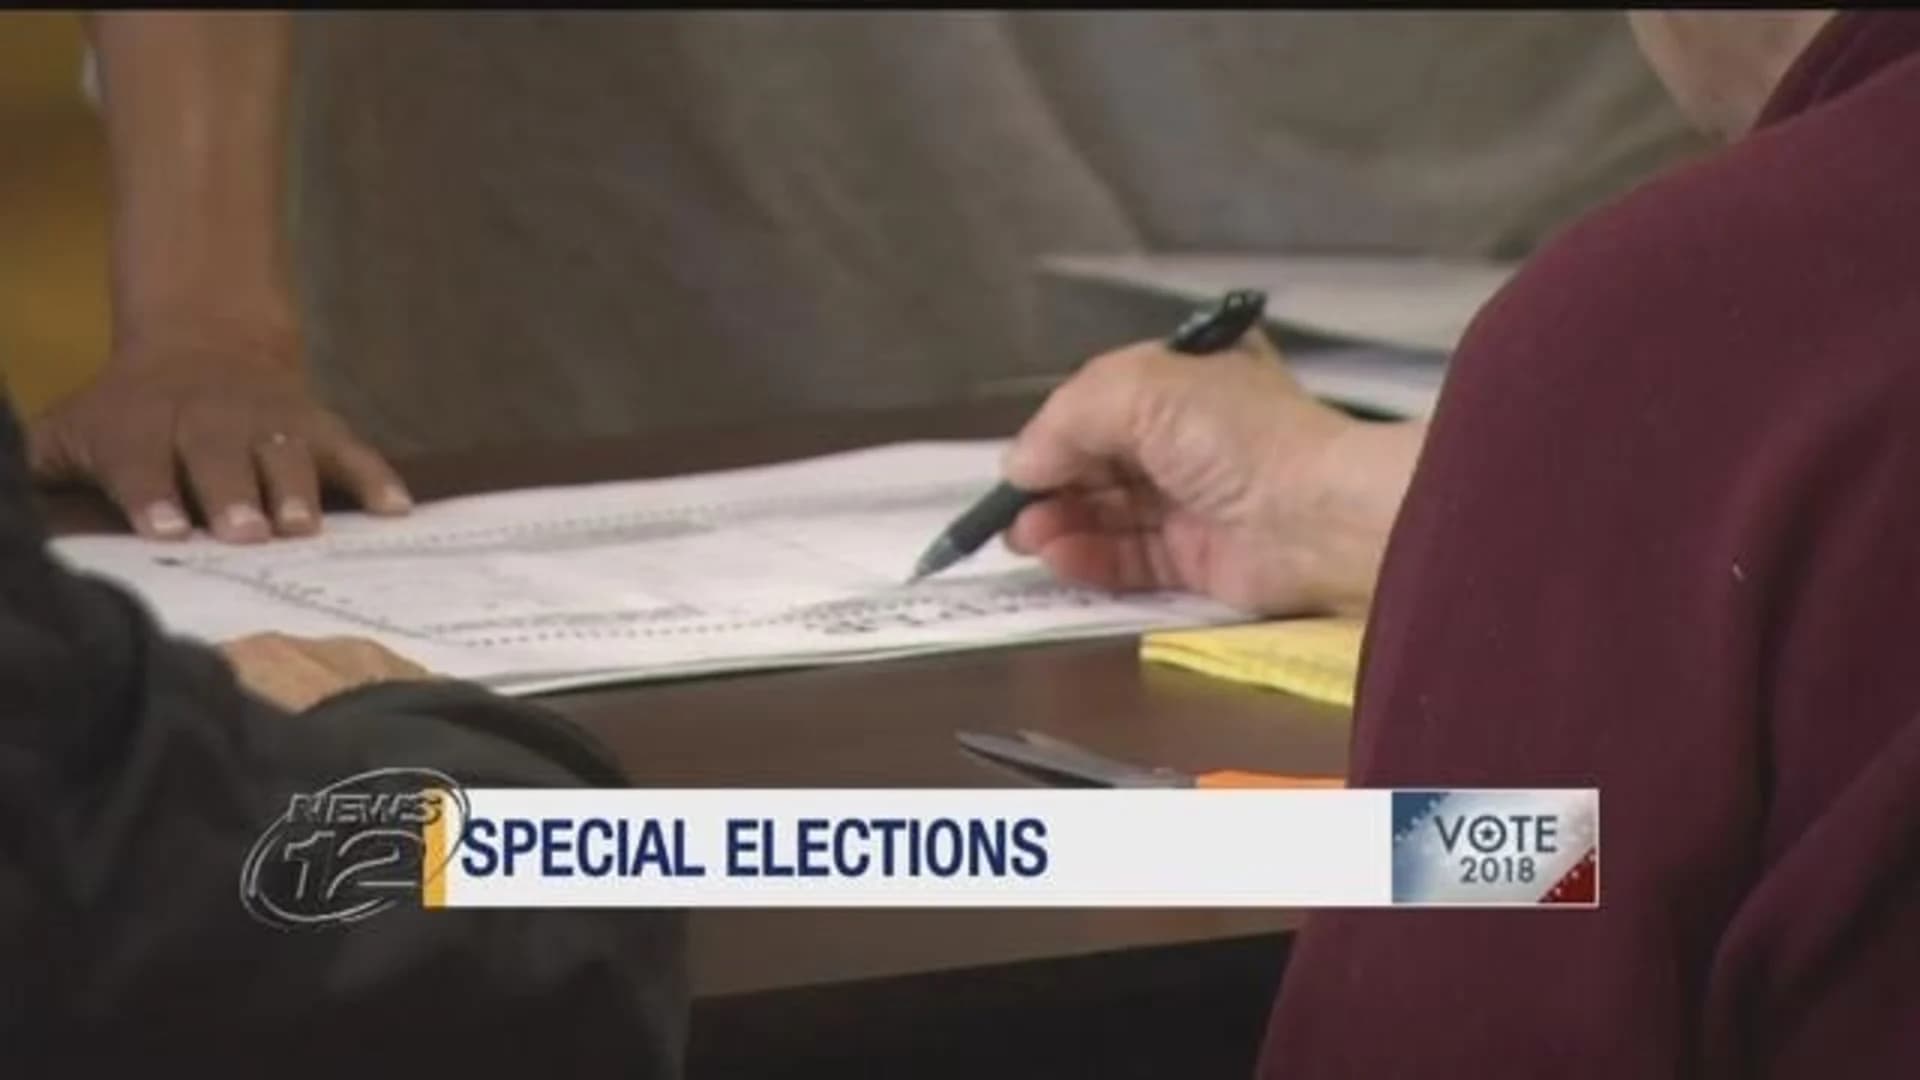 LI voters head to polls for special elections